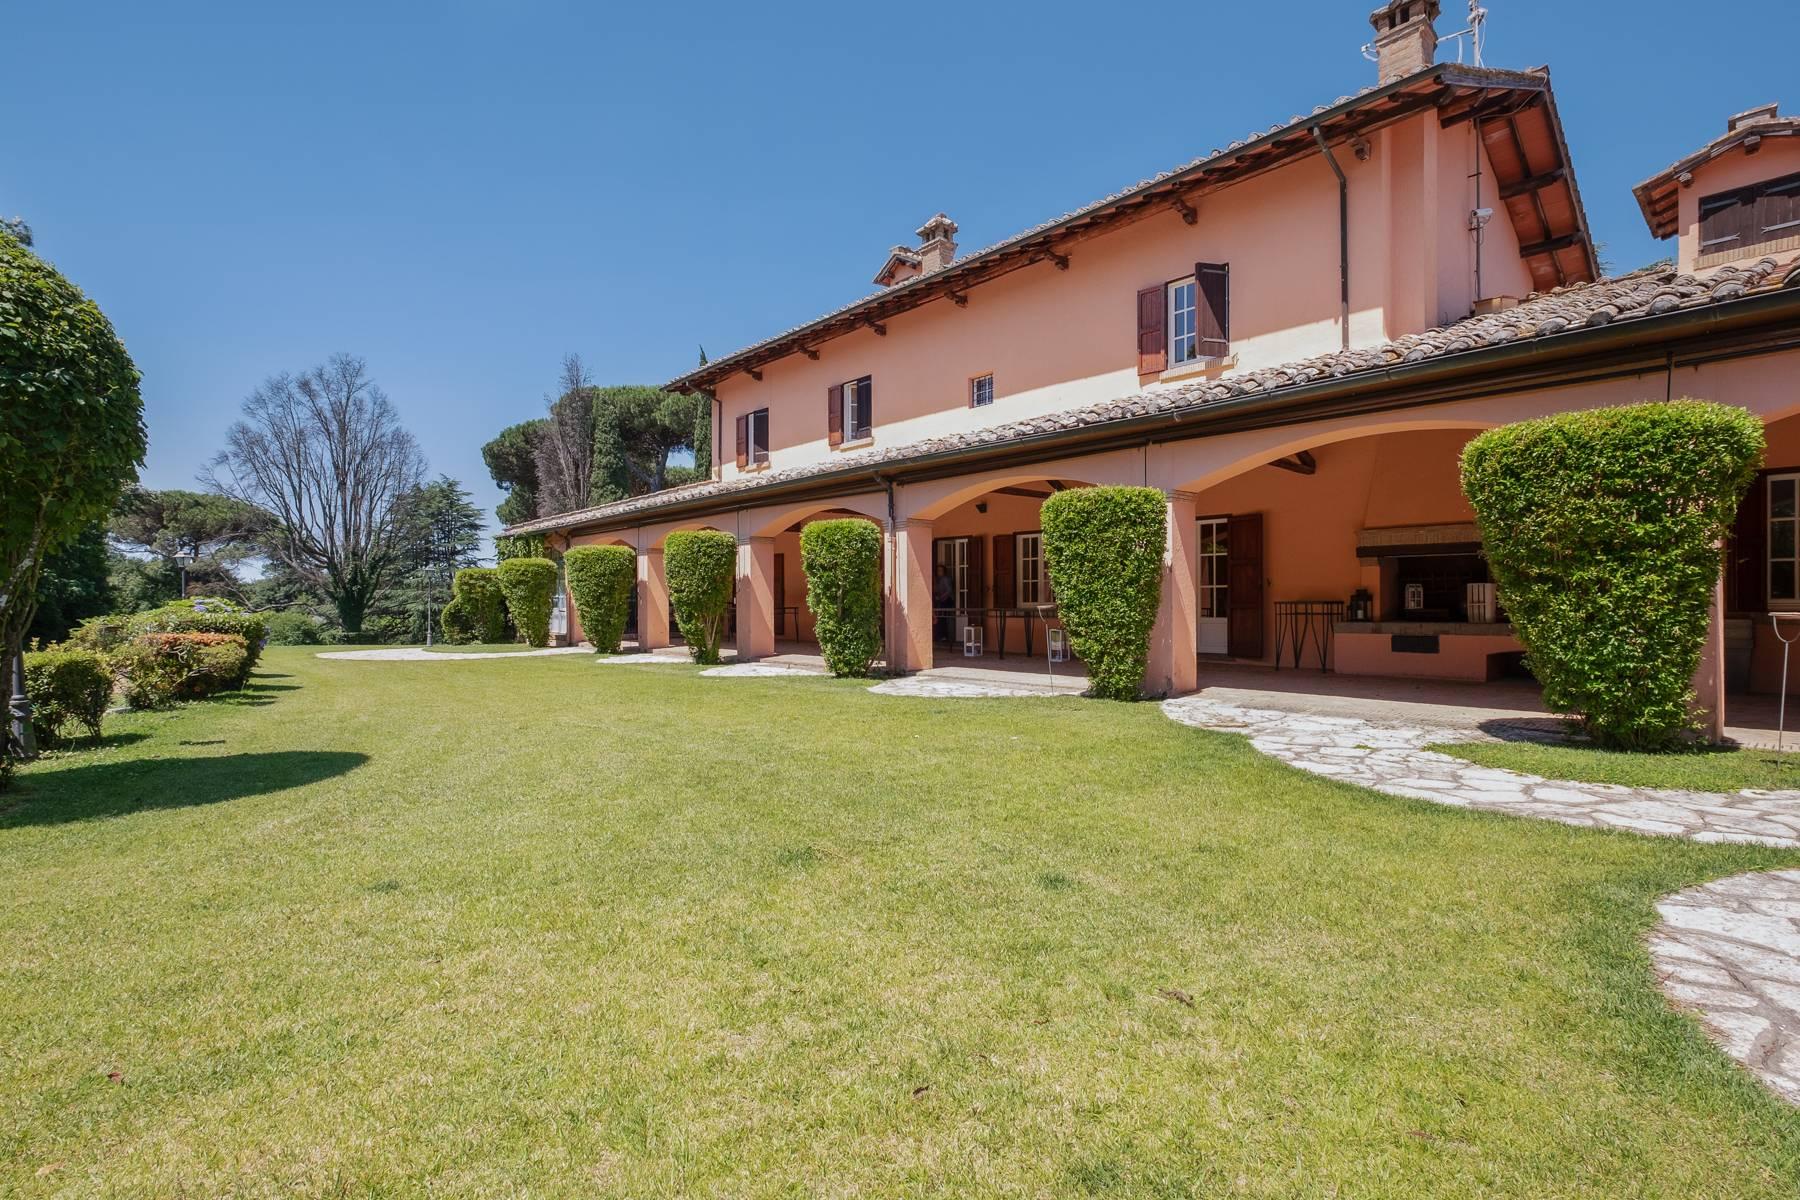 Claudia Estate: charm and elegance surrounded by nature - 7